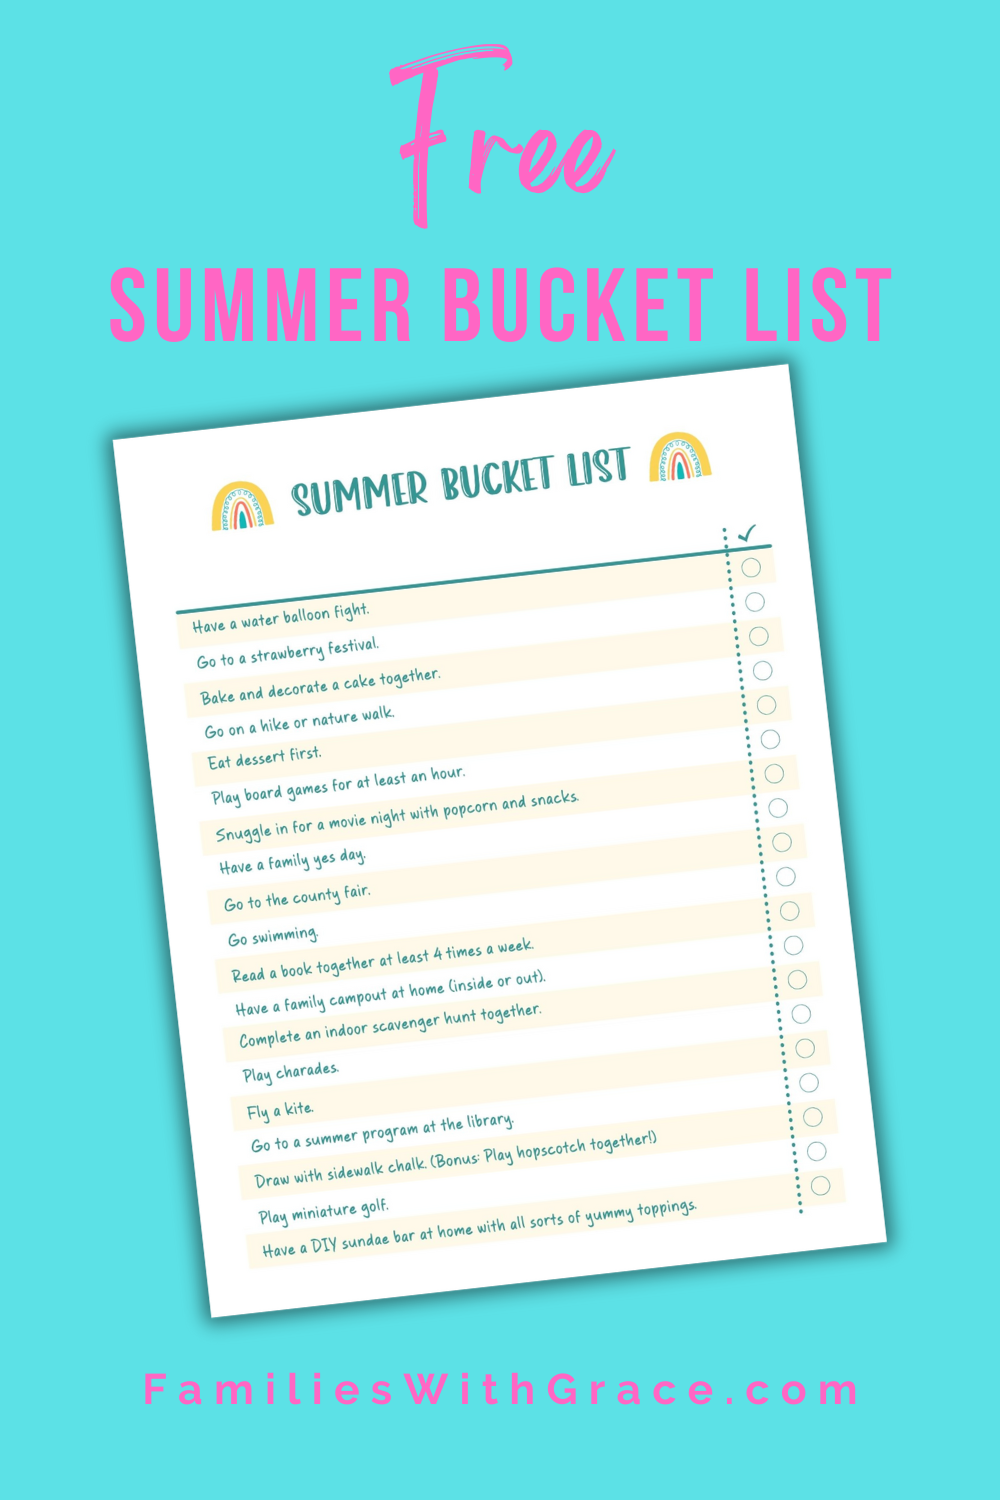 Summer planning tips you can use